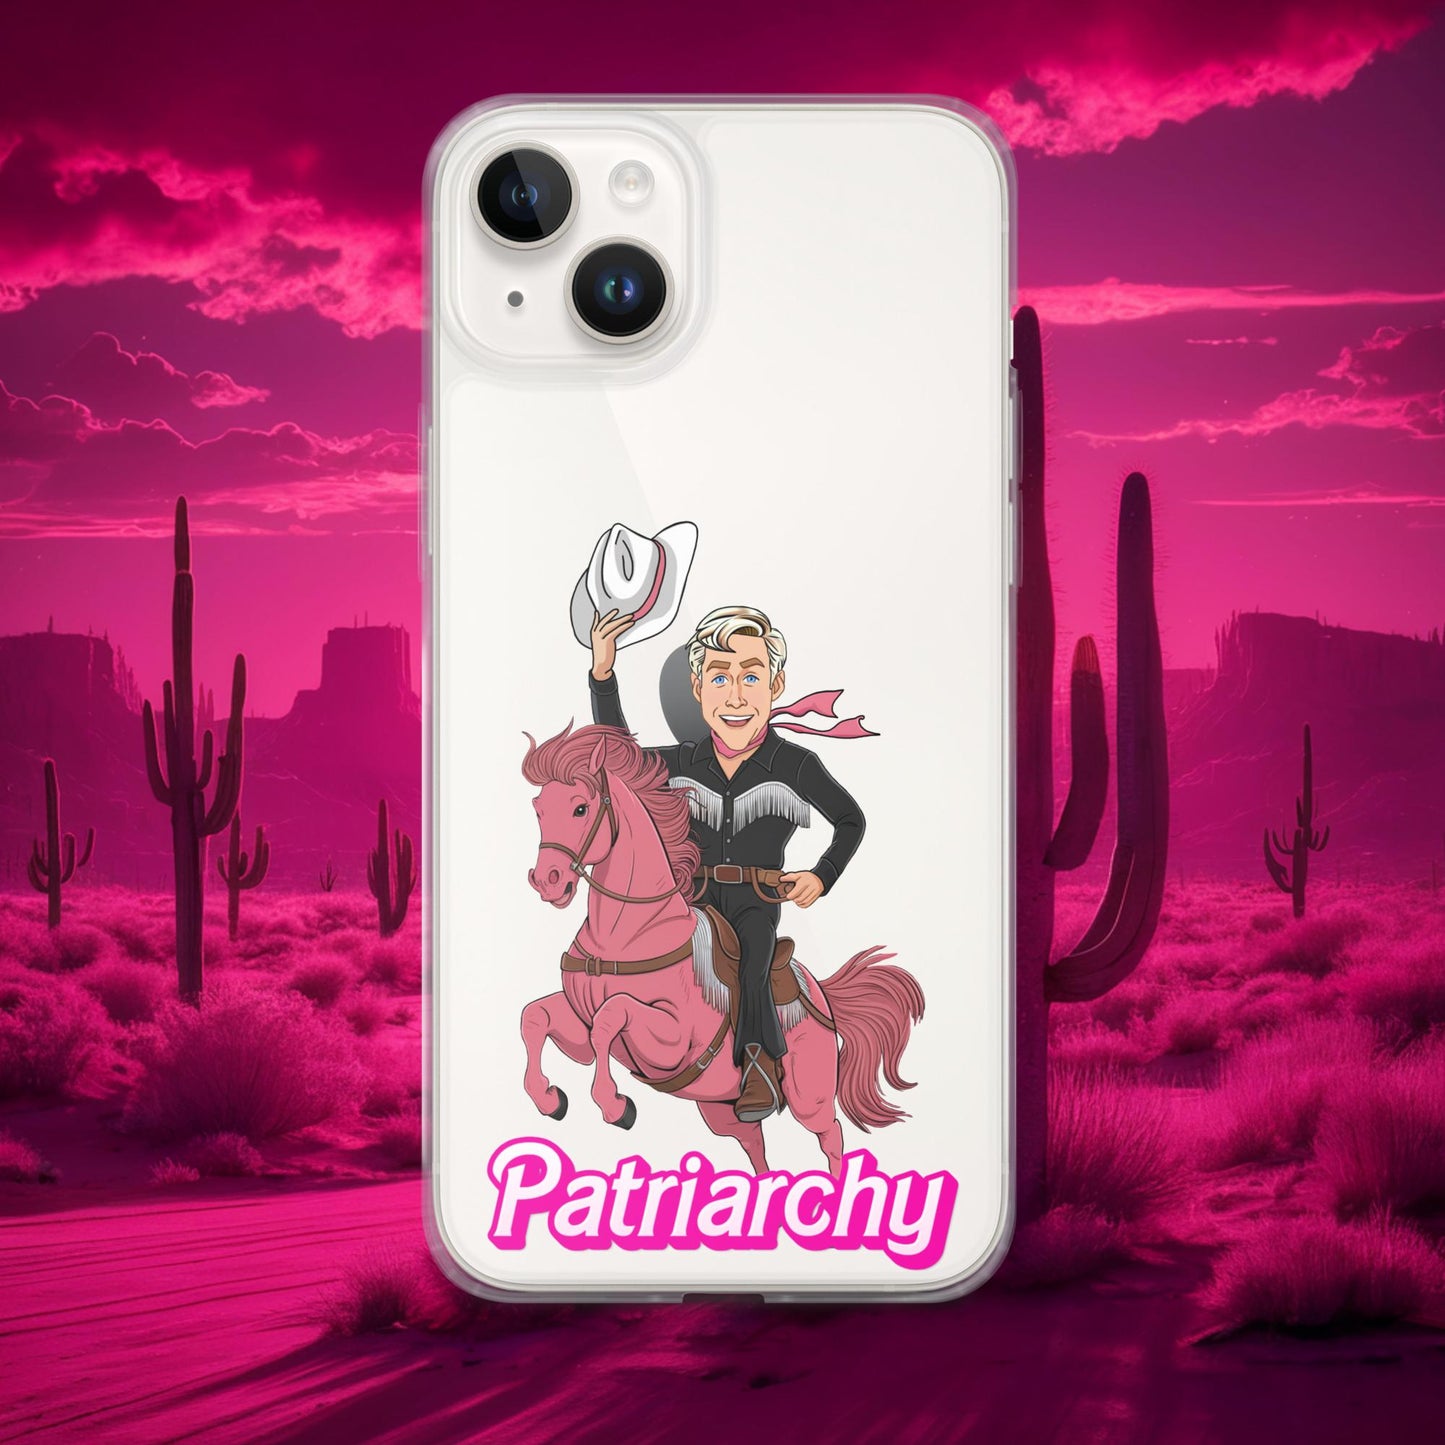 Ken Barbie Movie When I found out the patriarchy wasn't just about horses, I lost interest Clear Case for iPhone Next Cult Brand